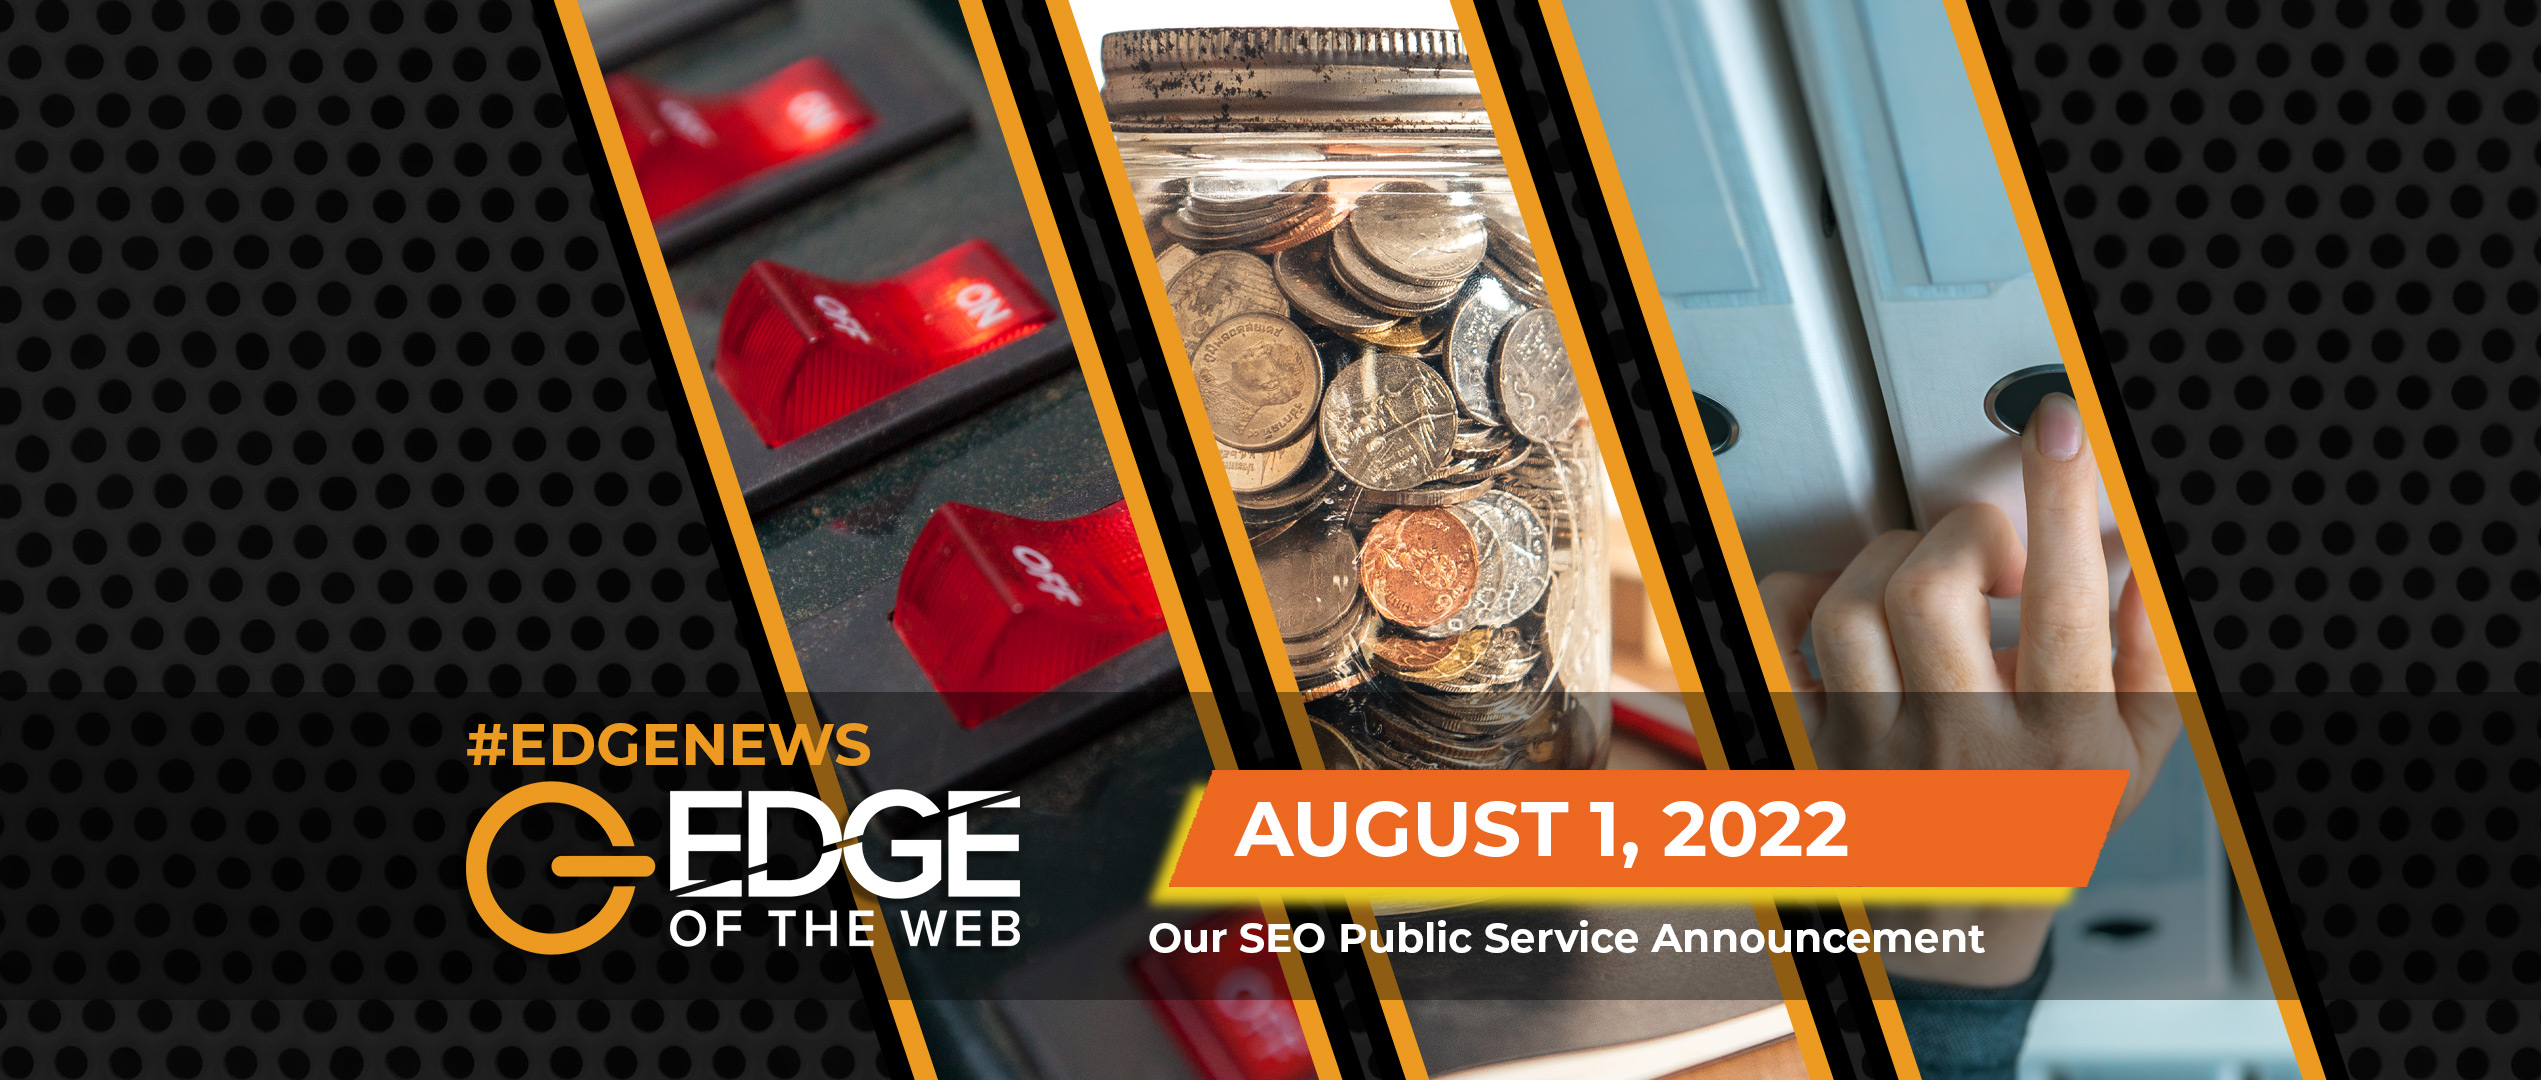 520 | News from the EDGE | Week of 08.01.2022